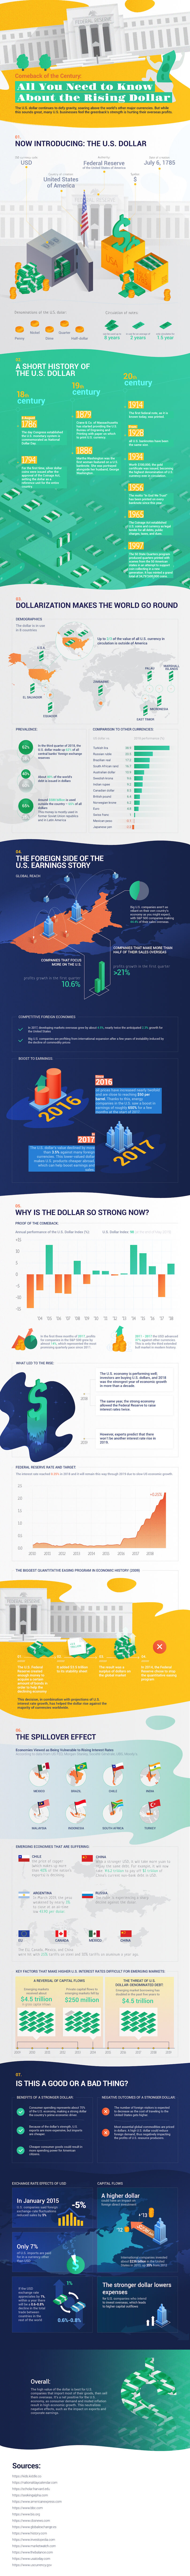 The Rising Dollar - Fortunly Infographic